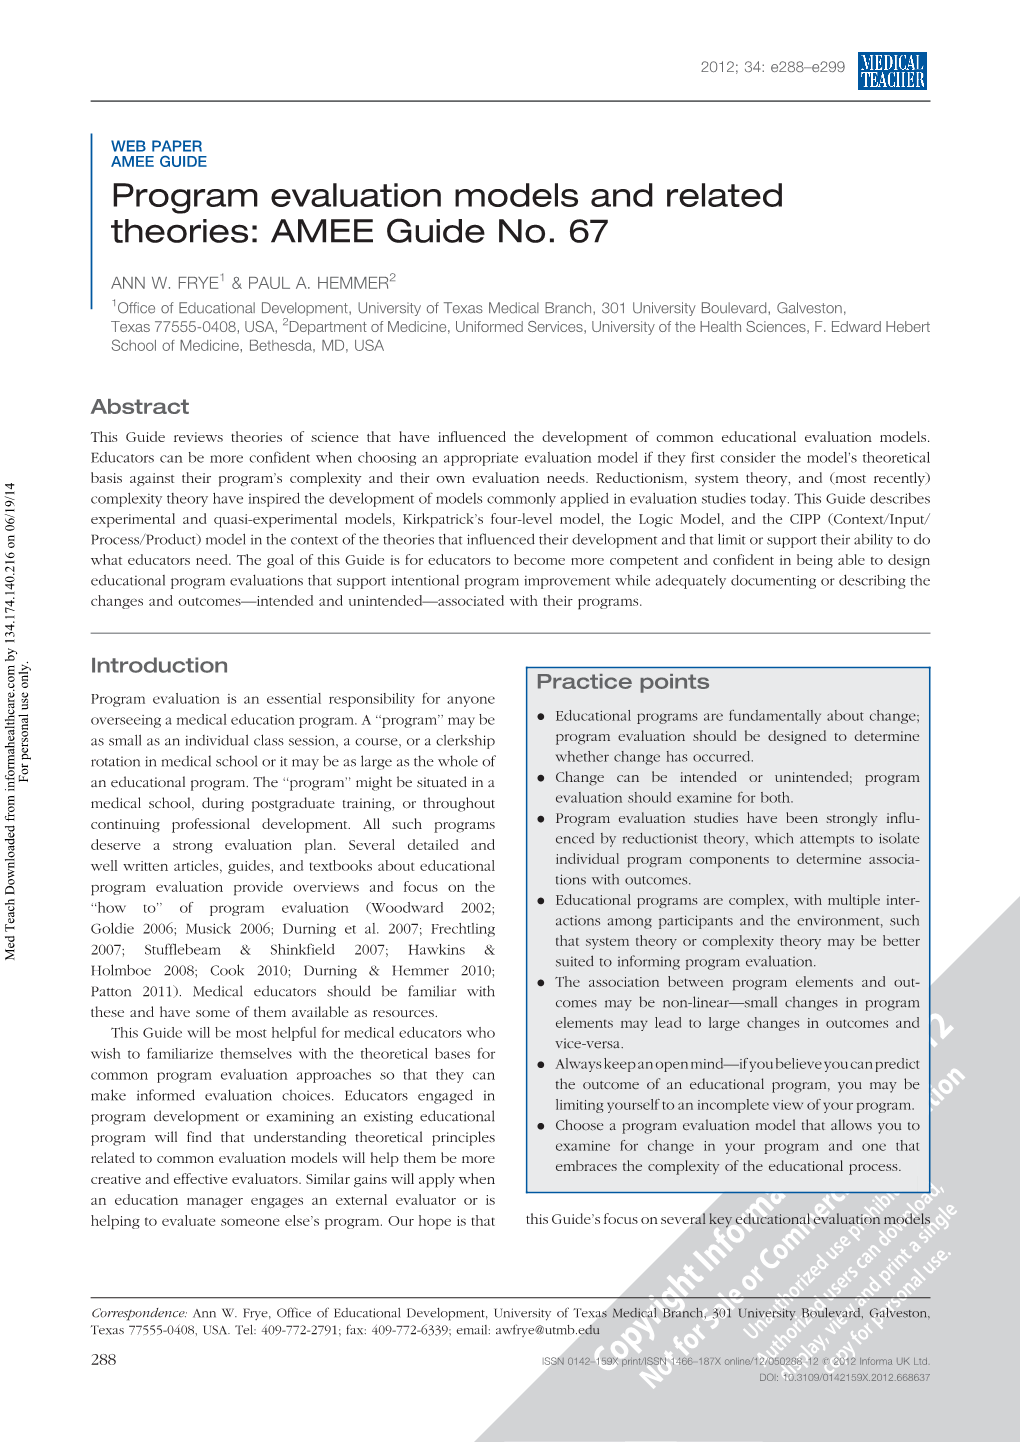 Program Evaluation Models and Related Theories: AMEE Guide No. 67